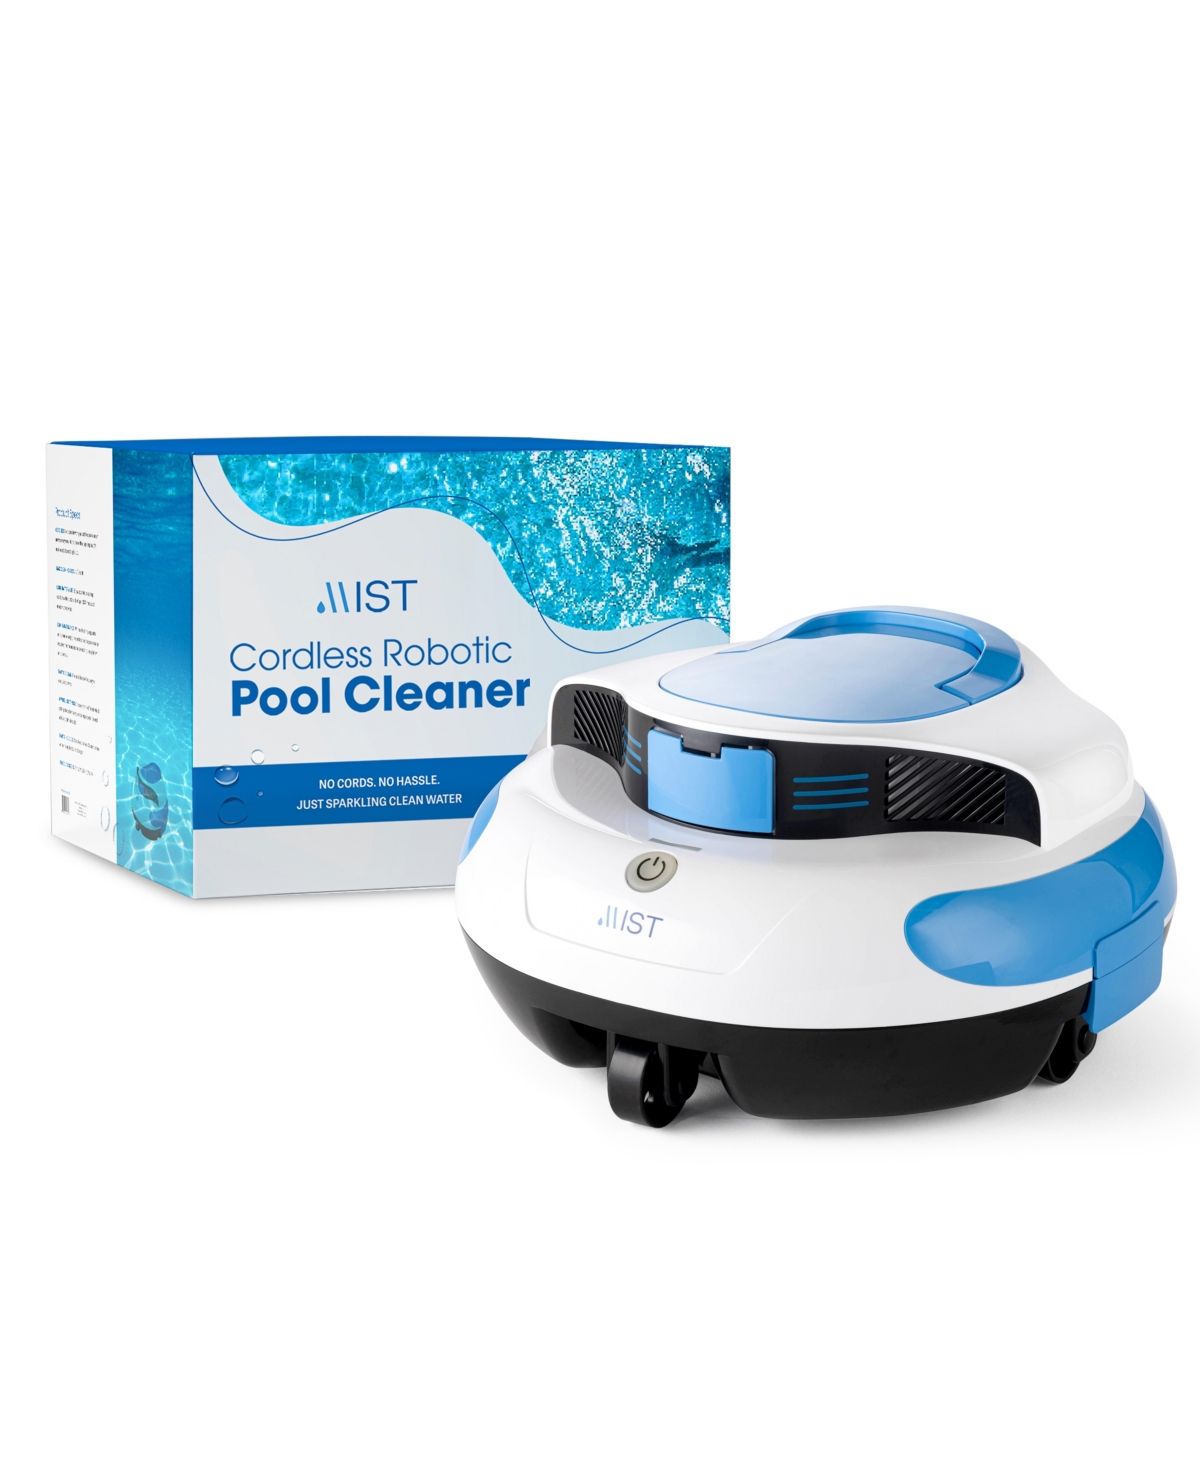 Cordless Advanced Robotic Pool Cleaner, Self-Parking, Pool Vacuum Has 100 Mins Maximum Run Time, Ideal for Above/In-Ground Flat Pools up to 10 Fe